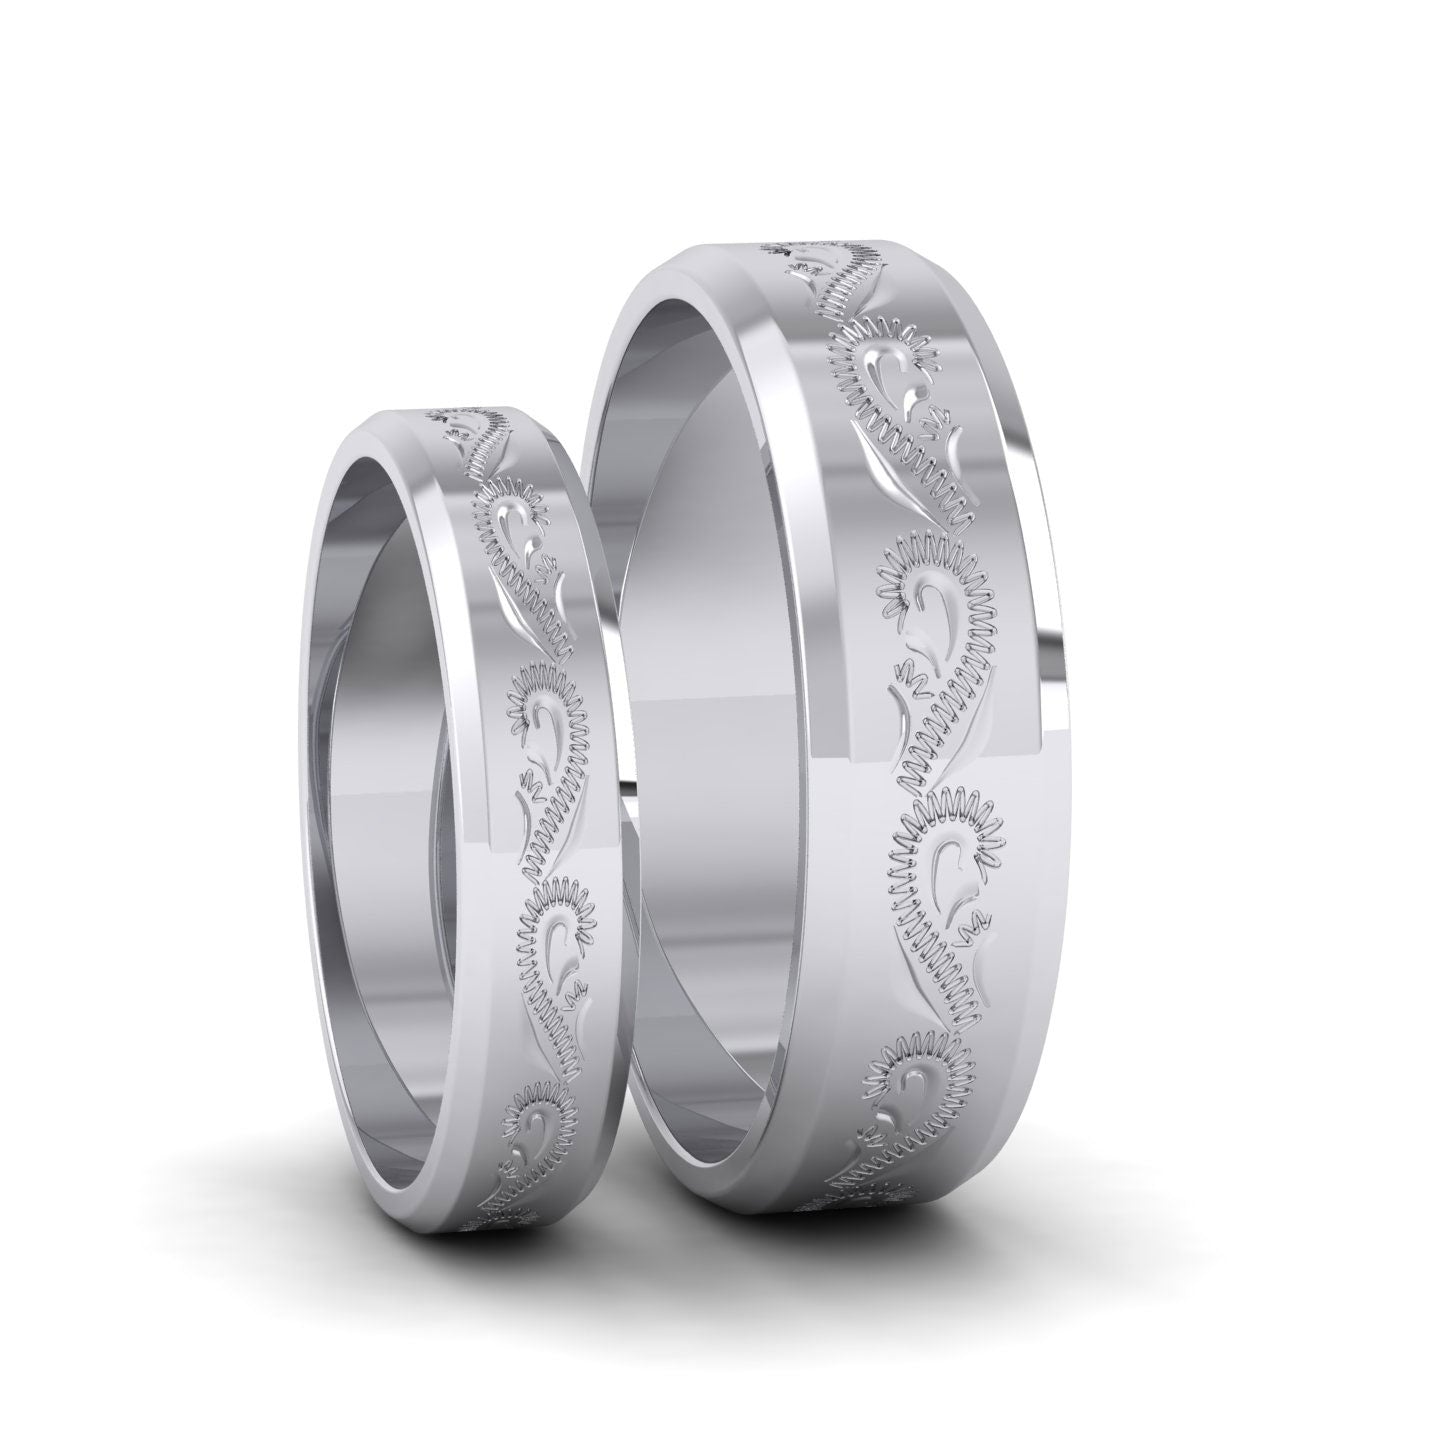 Engraved 18ct White Gold 6mm Flat Wedding Ring With Bevelled Edge